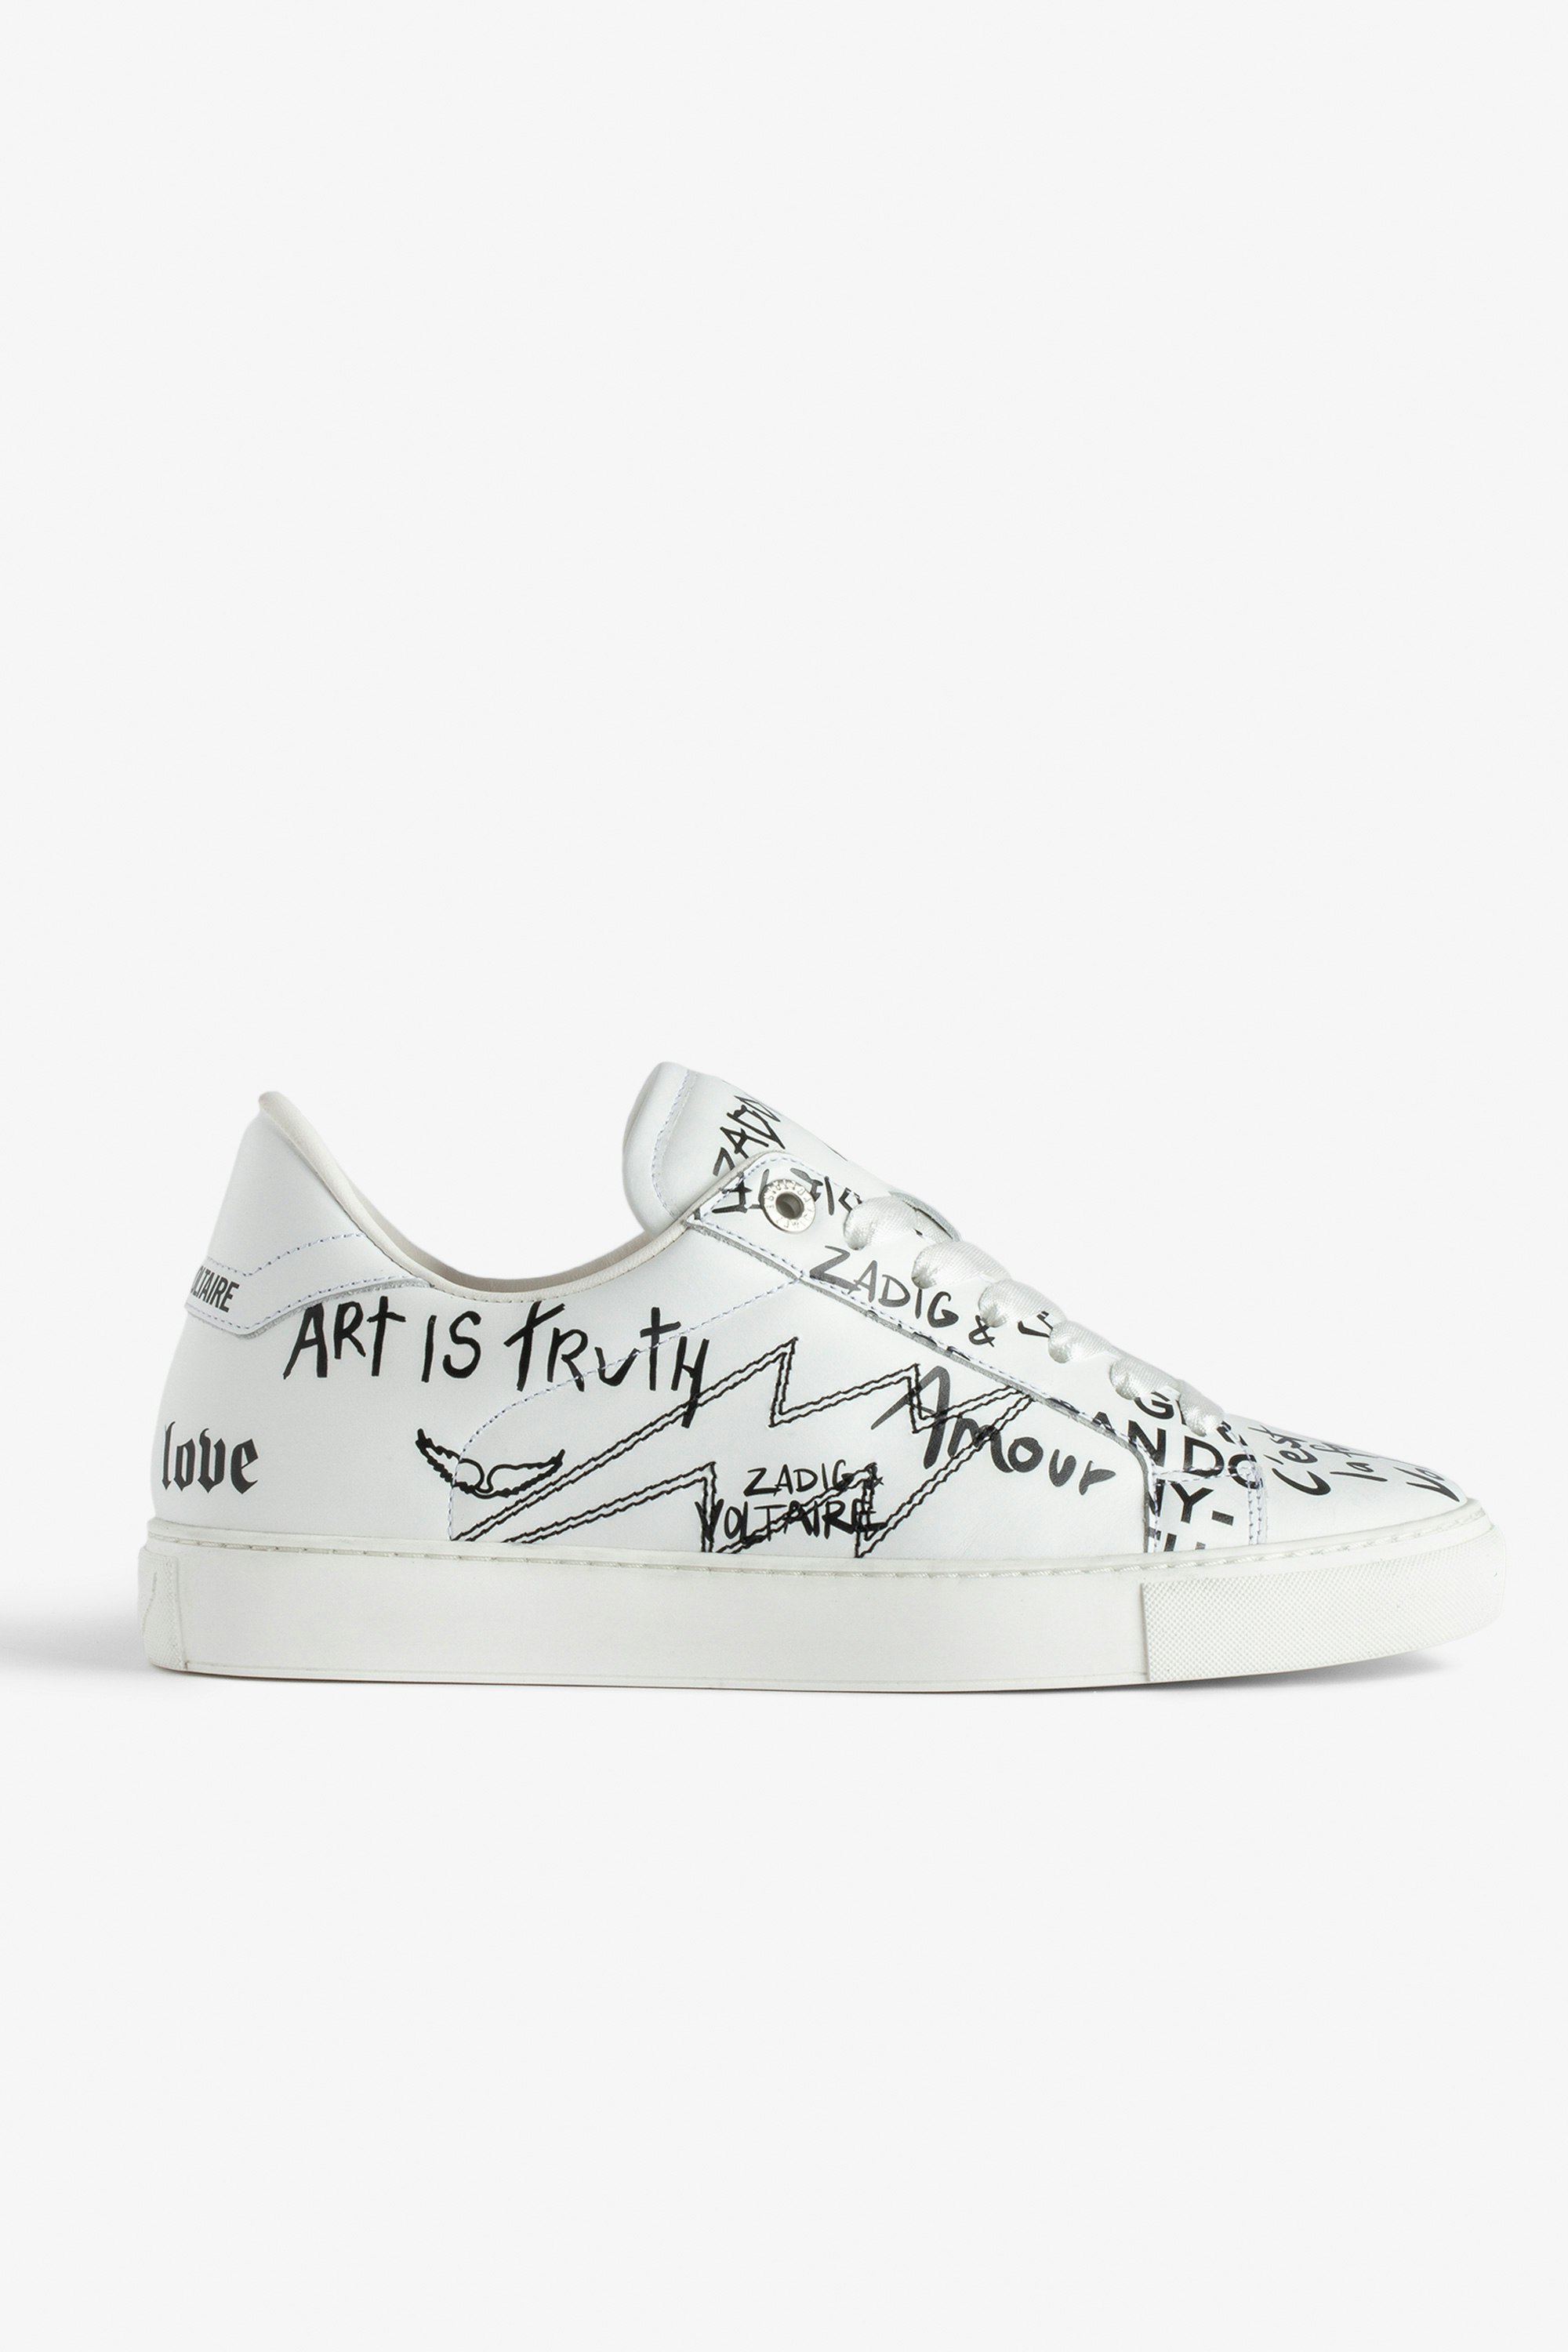 ZV1747 La Flash Low-Top Graffiti Sneakers - Women’s white smooth leather low-top sneakers with lightning bolt panels and graffiti.